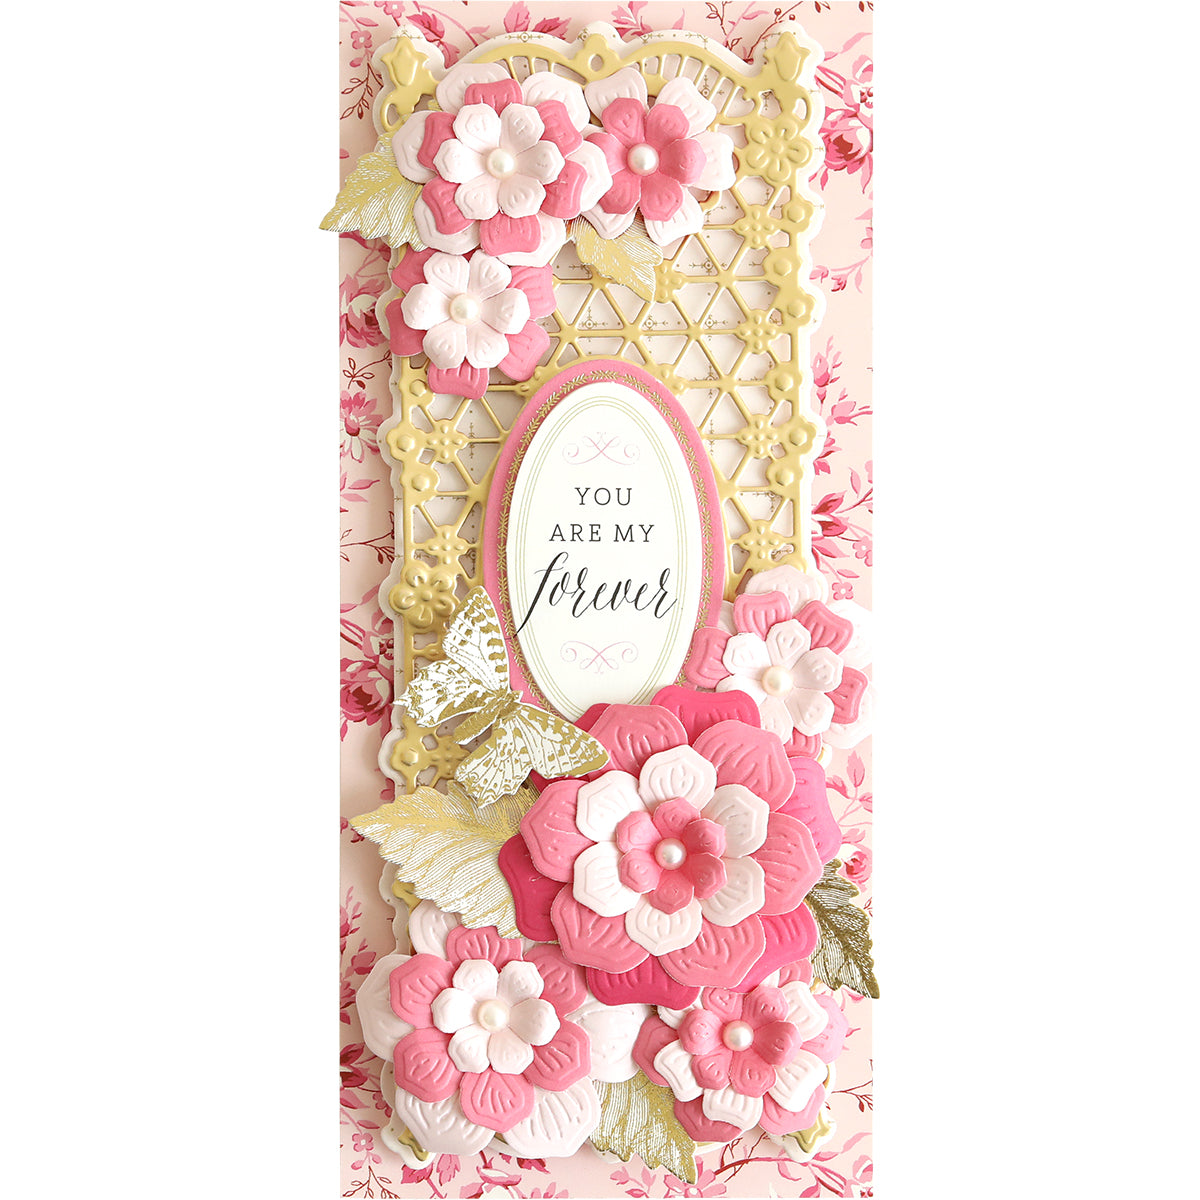 A pink and white Slimline Flower Cut and Emboss Folders card with flowers on it.